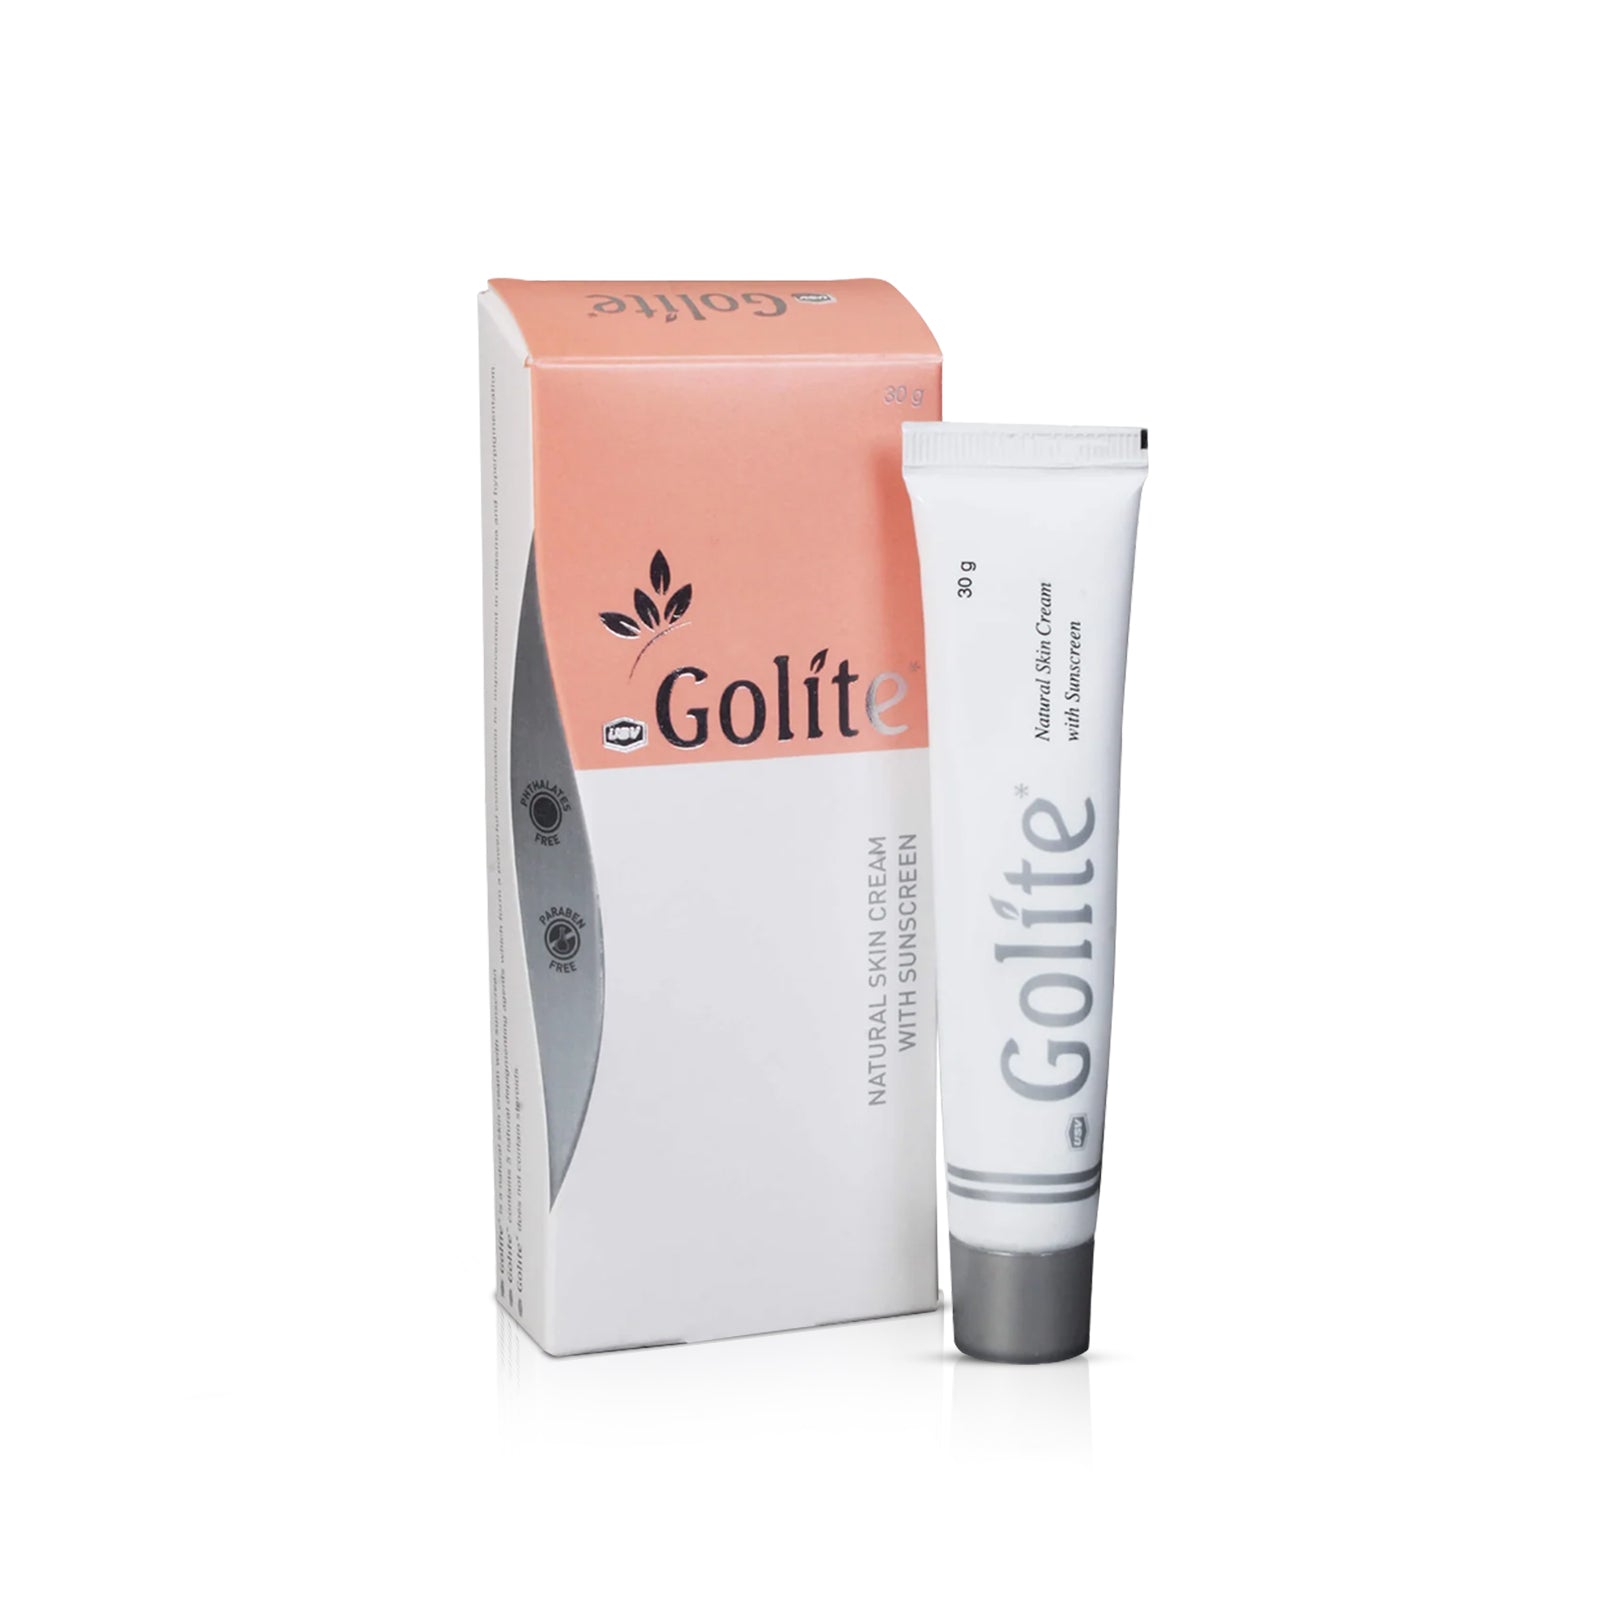 Golite Natural Skin cream with Sunscreen 30 gm